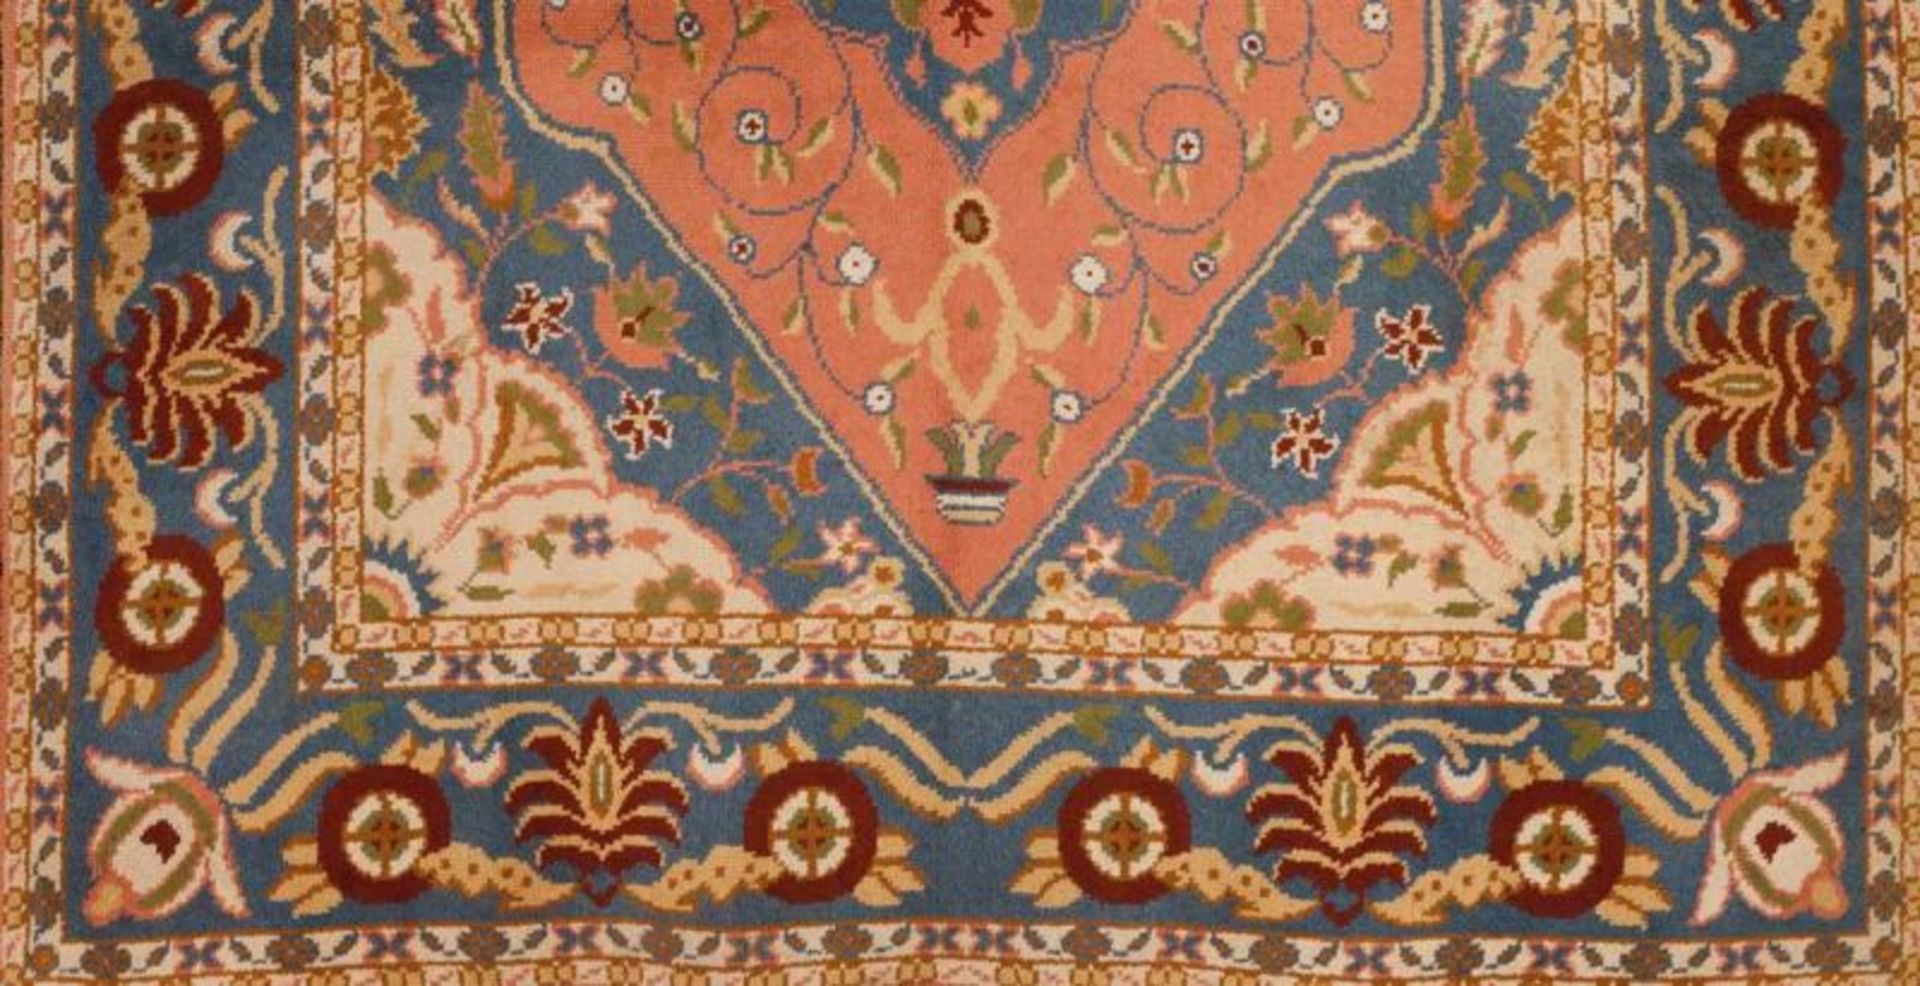 A Tabriz carpet Cotton and wool of floral design with central cartouche in blue, pink and beige